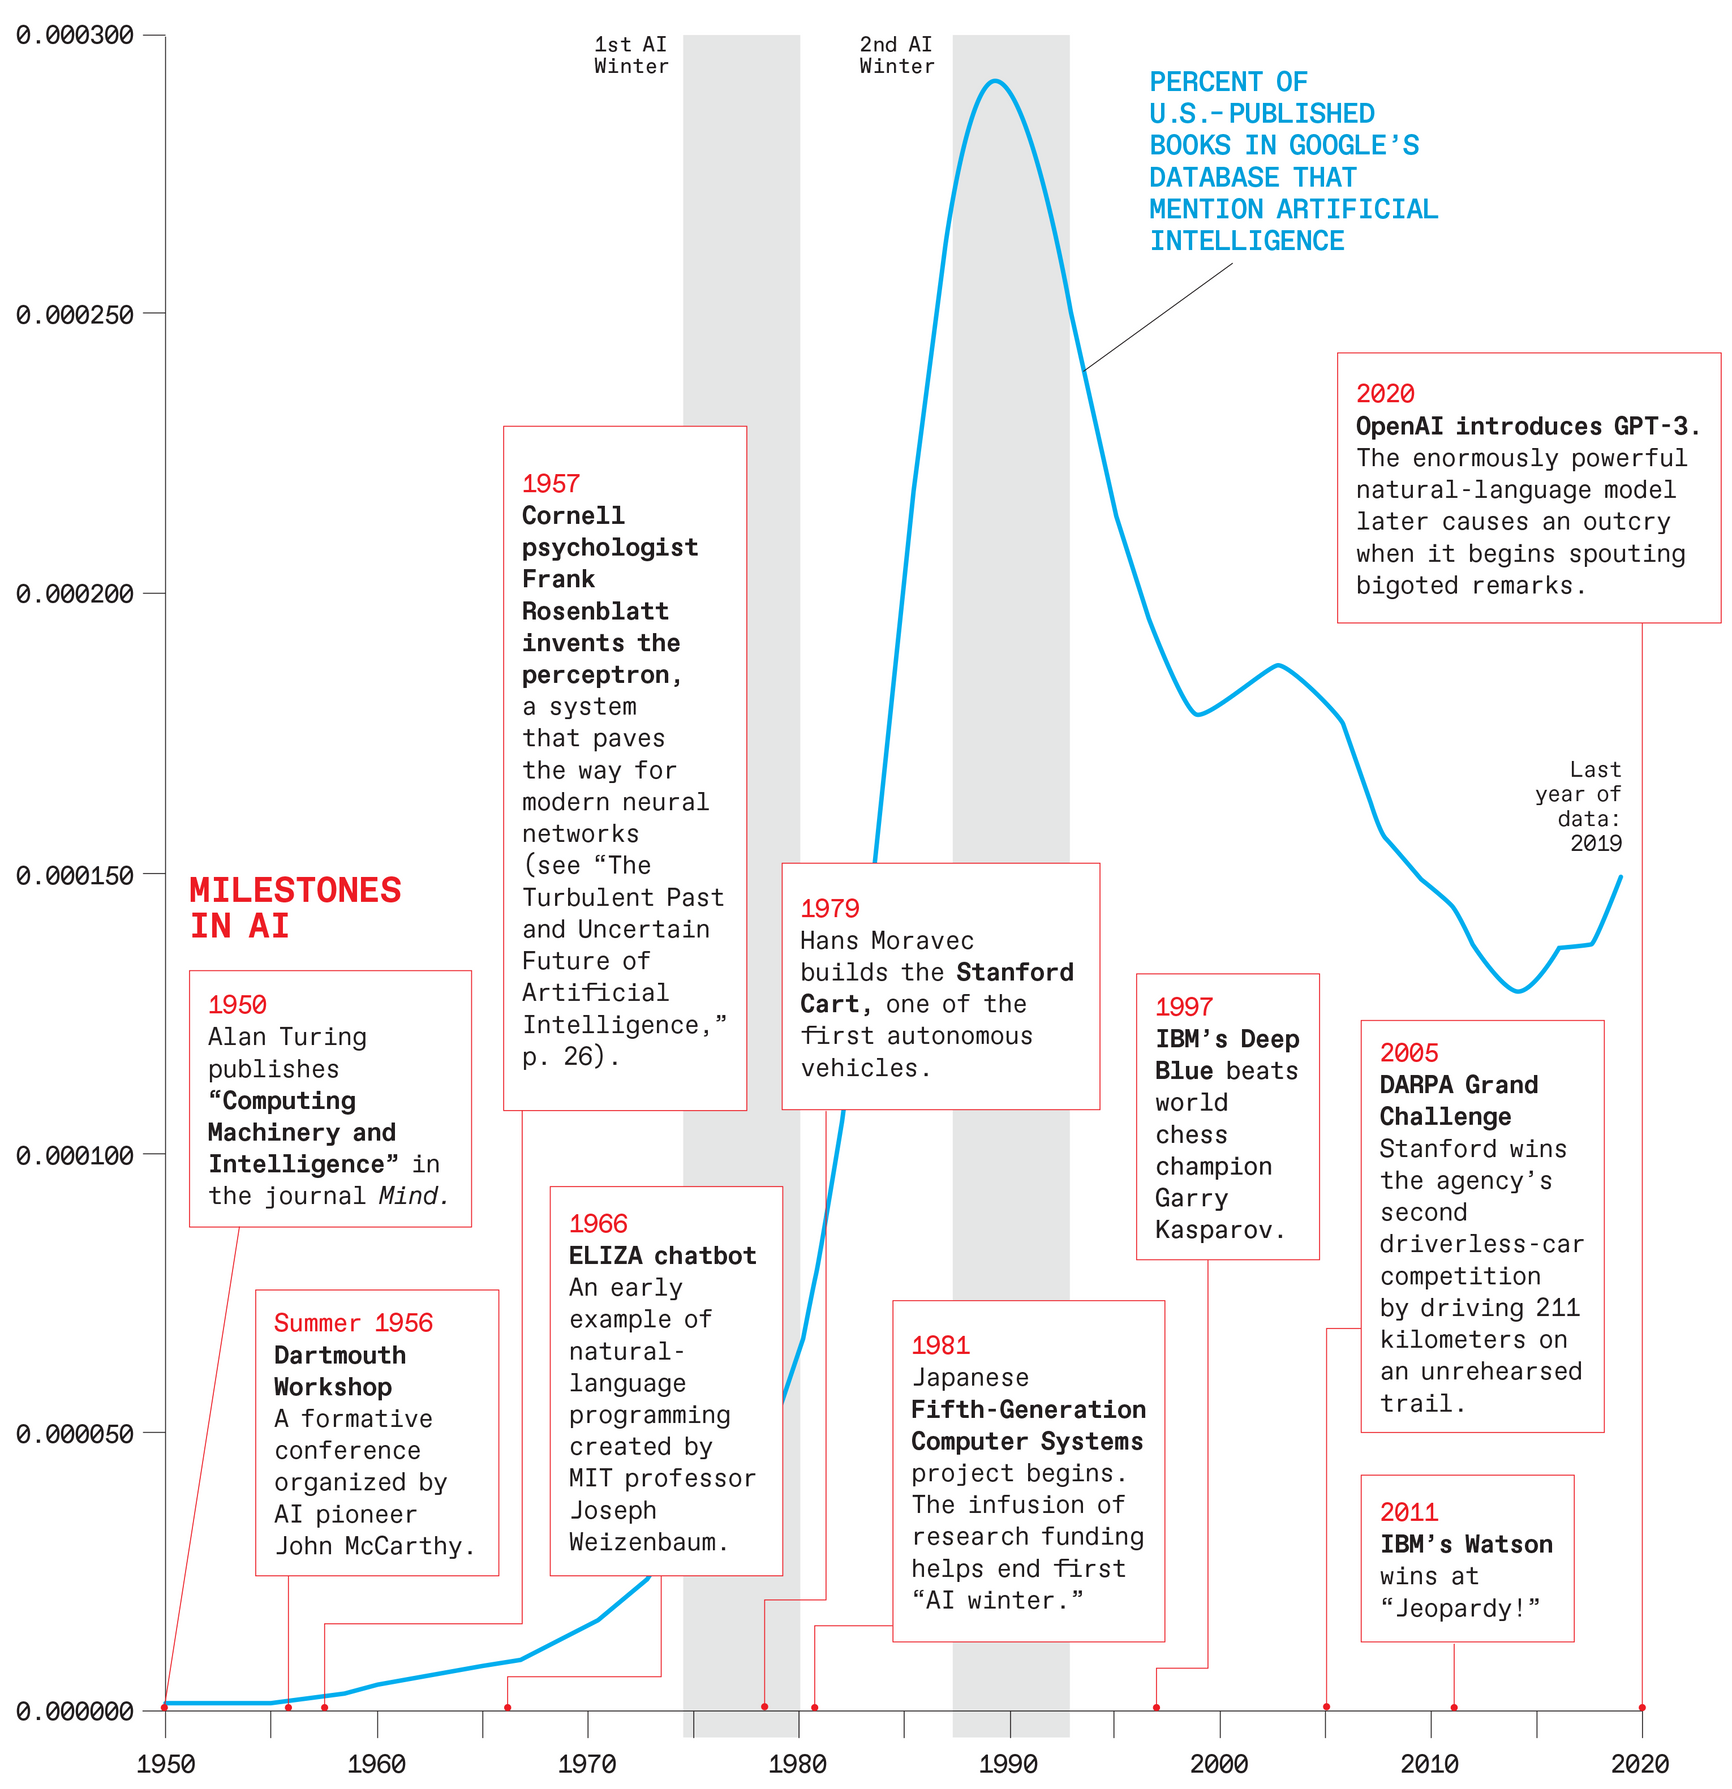 A chart of Milestones in AI from 1950 to 2020.